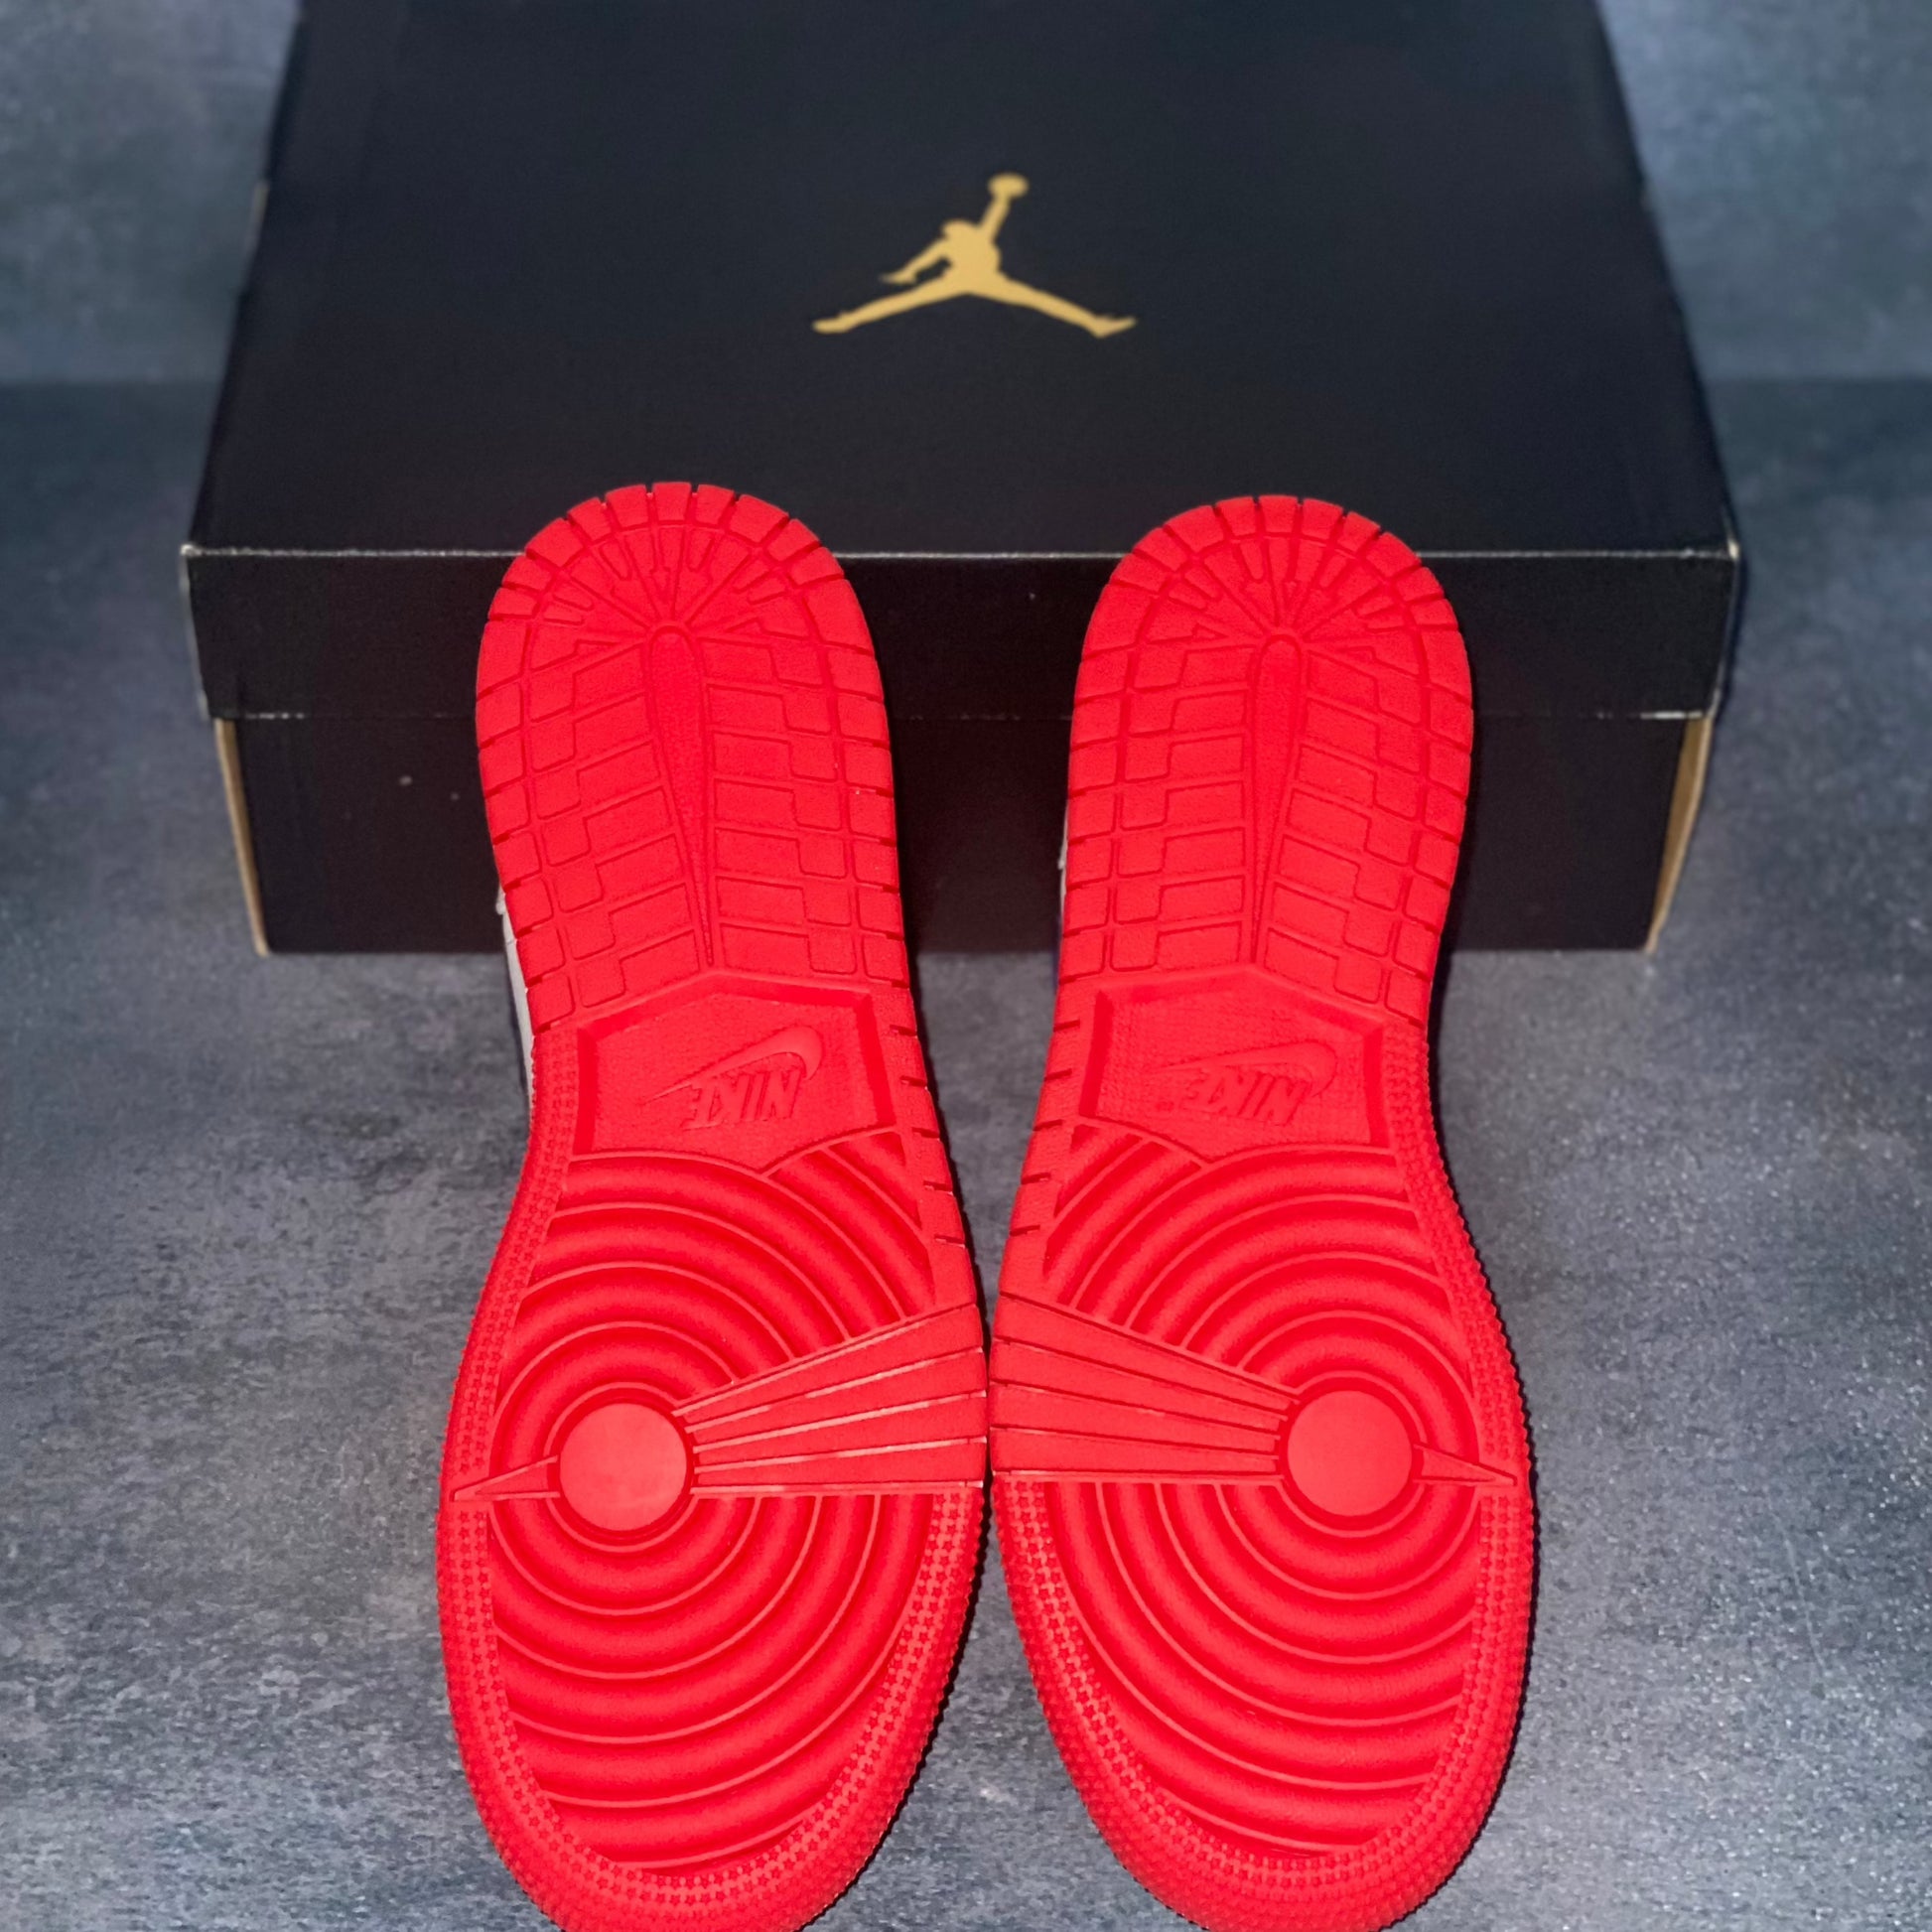 The red sneaker bottom of the red, white, and blue Nike Air Jordan 1 Mid sneakers with a black Air Jordan sneaker box.